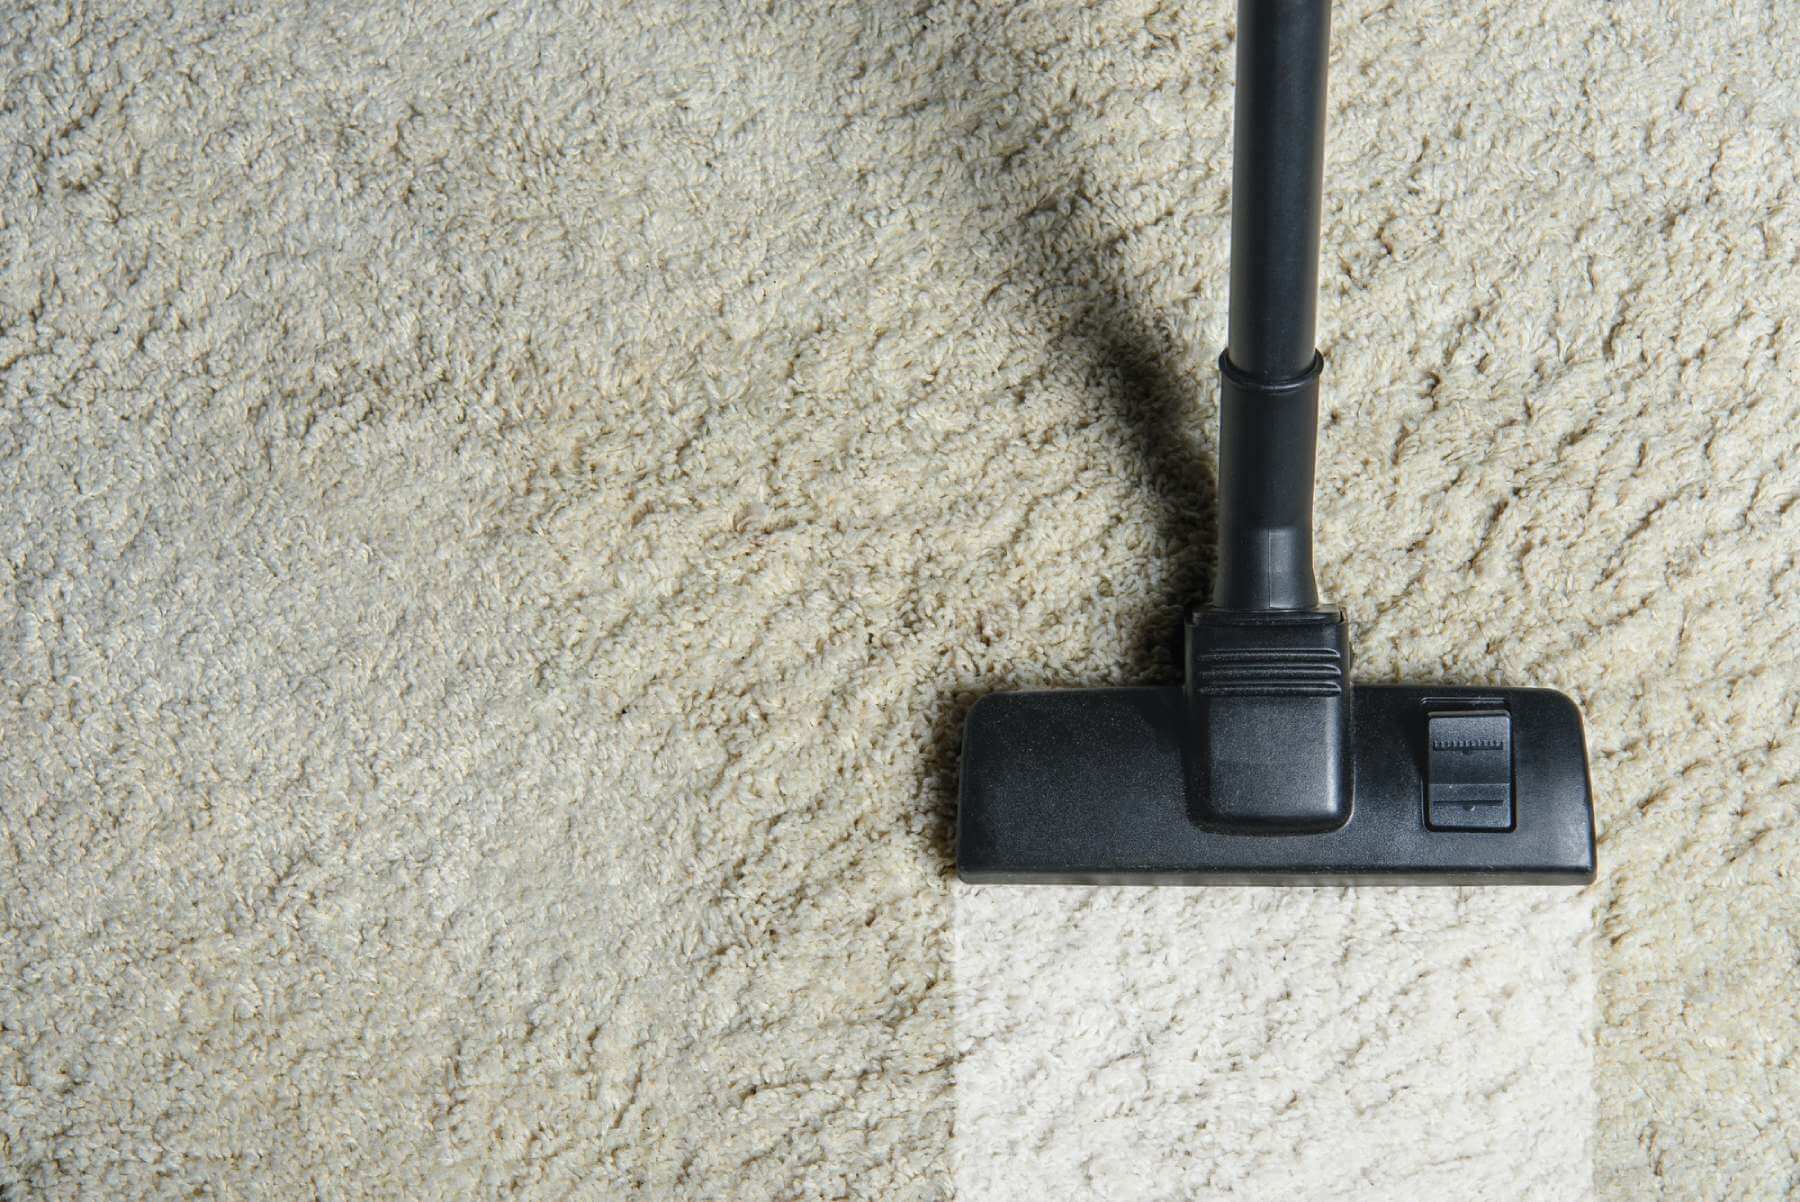 https://www.mightycleancarpetandupholstery.com/wp-content/uploads/2021/08/cleaning-carpet-with-professional-vacuum-cleaner.jpg